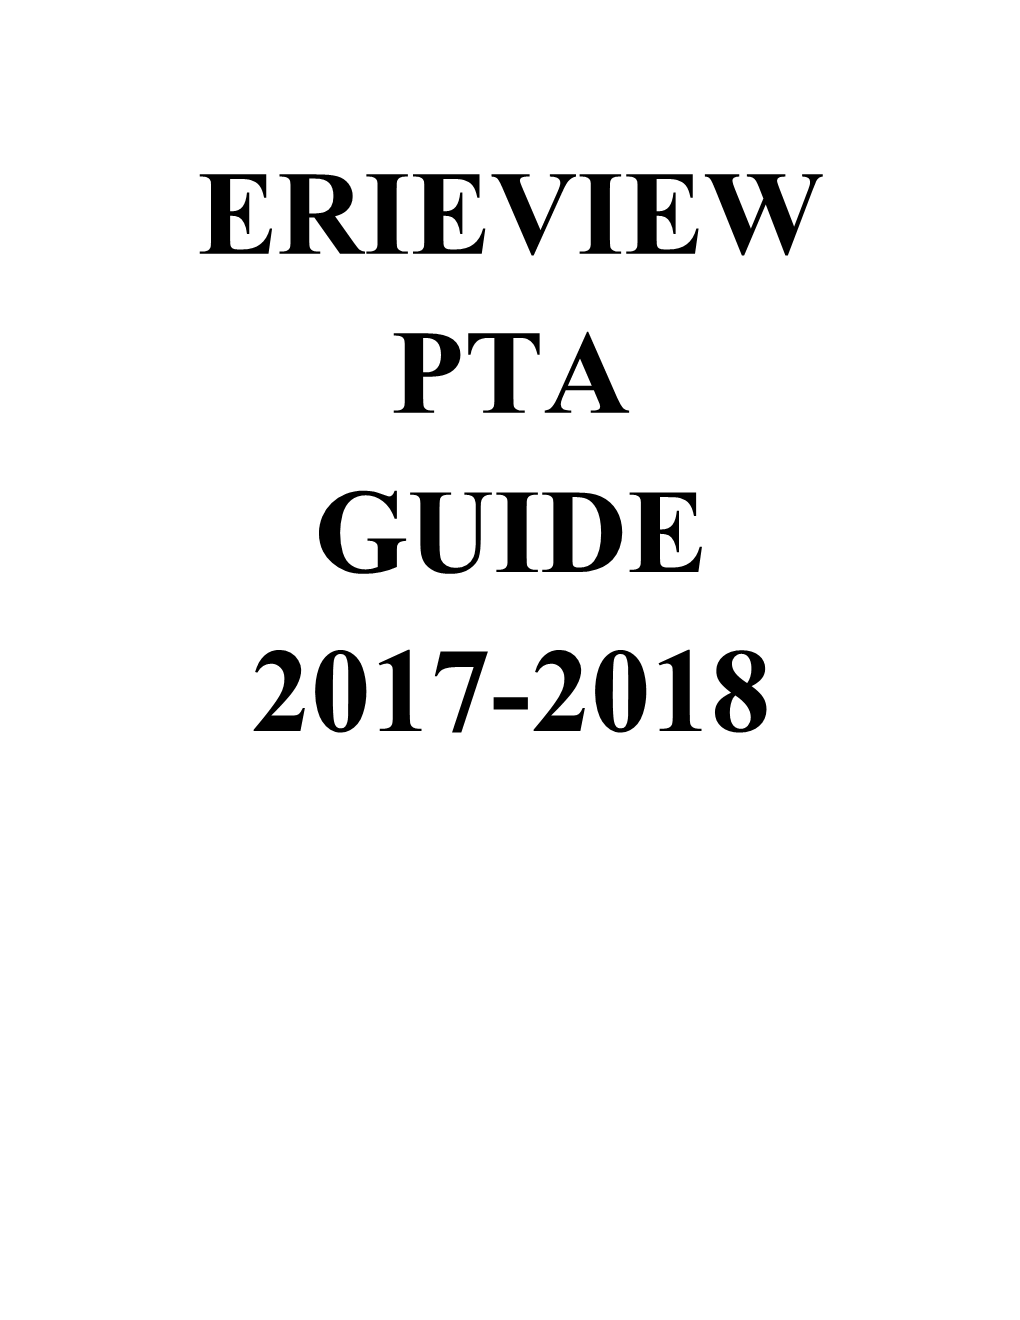 There Are Five Main Components of the Erieview PTA